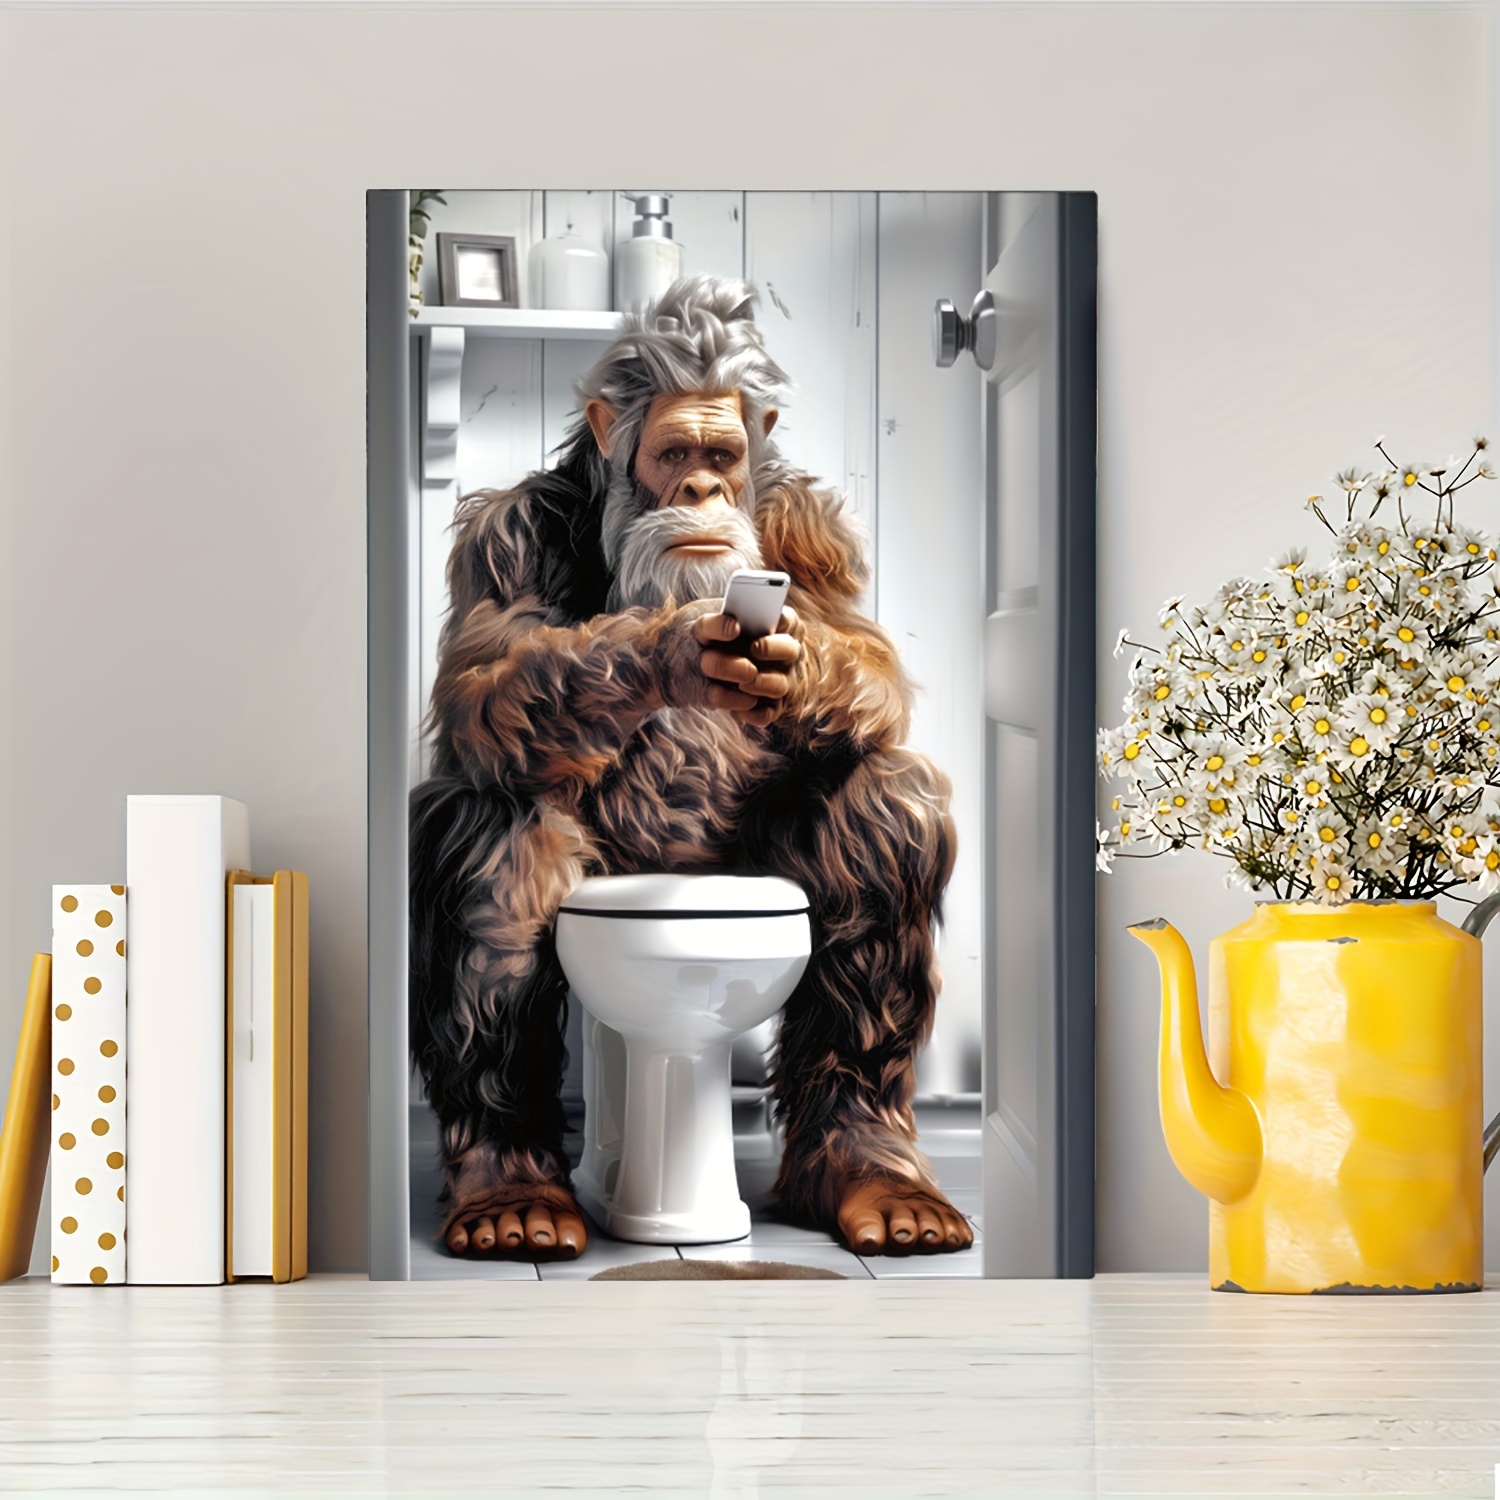 

Funny Sasquatch On Toilet Canvas Art Print - Perfect For Home & Office Decor, Bedroom, Living Room, Kitchen, Bathroom Room Decoration With Framed, Ready To Hang - Thickness 1.5 Inches